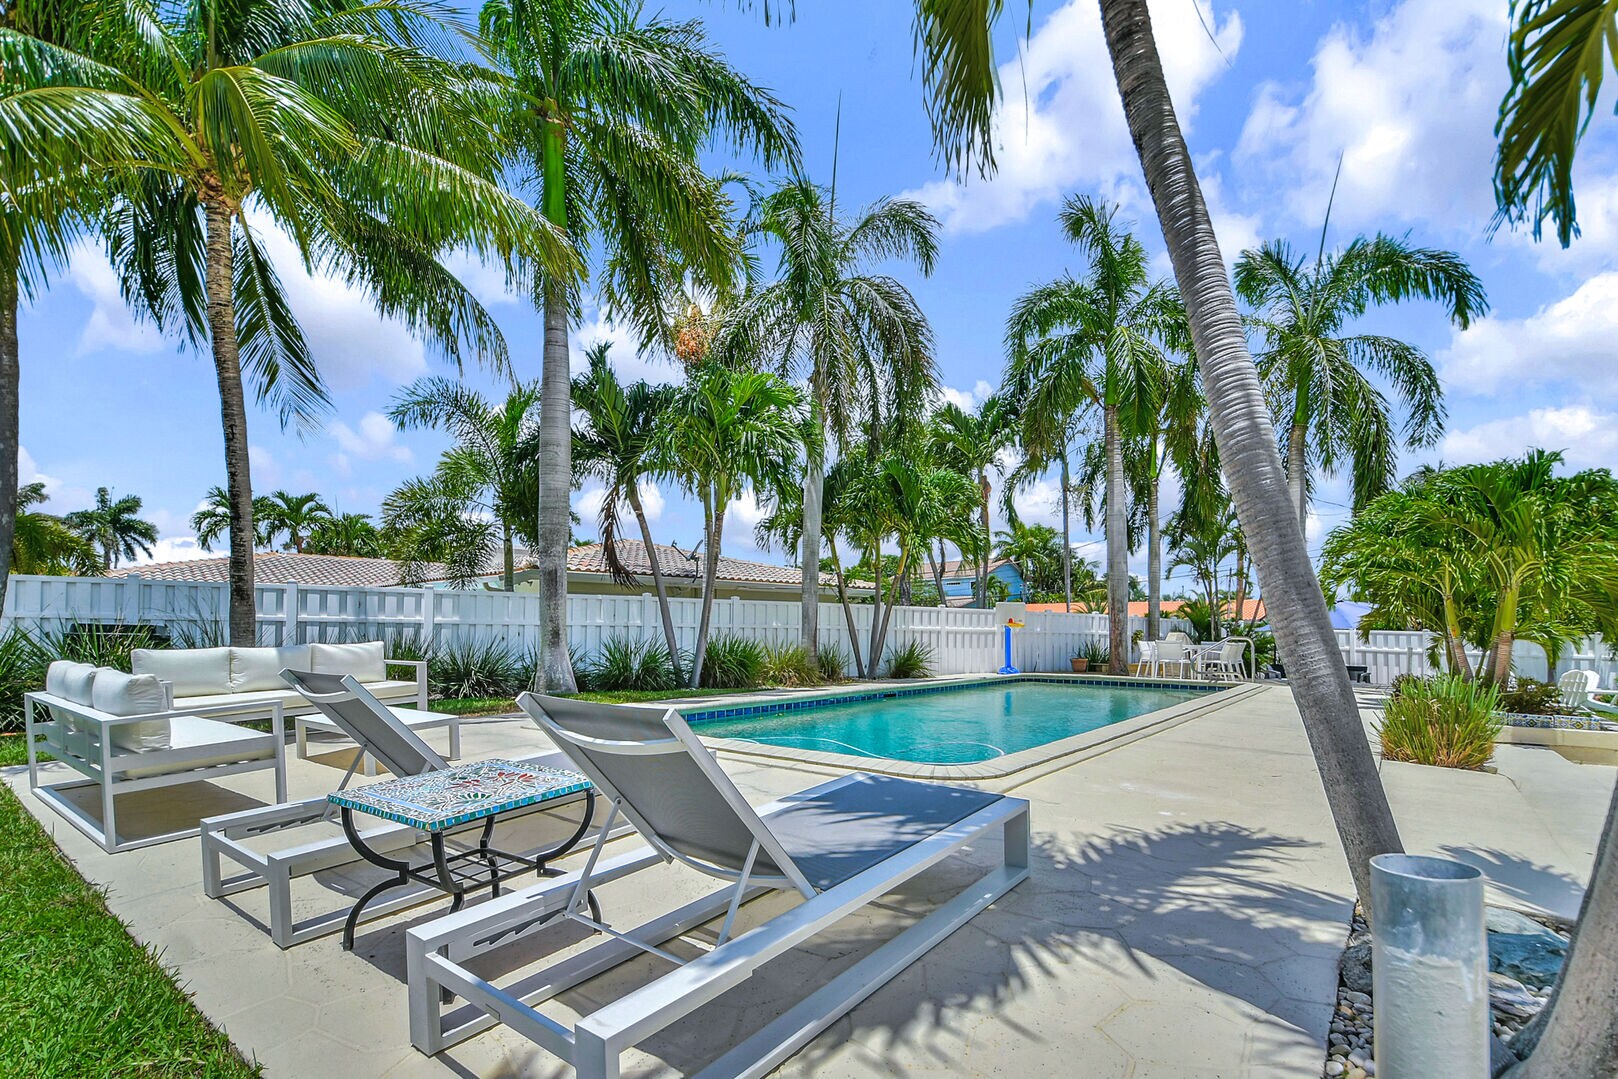 Sun loungers and palm trees surround the heated pool